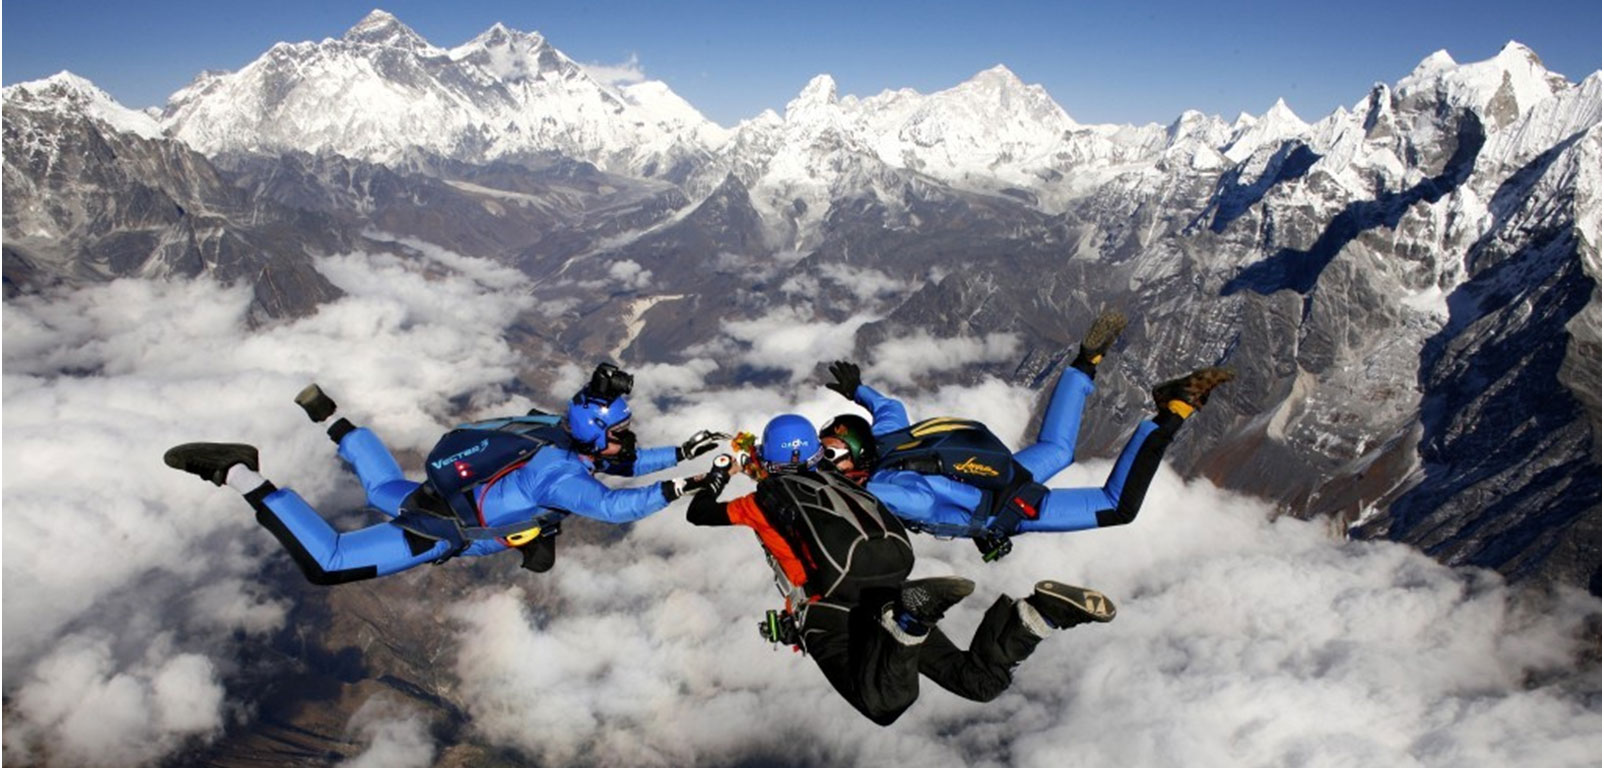 Skydiving in Nepal, Adventure Tourism in Nepal